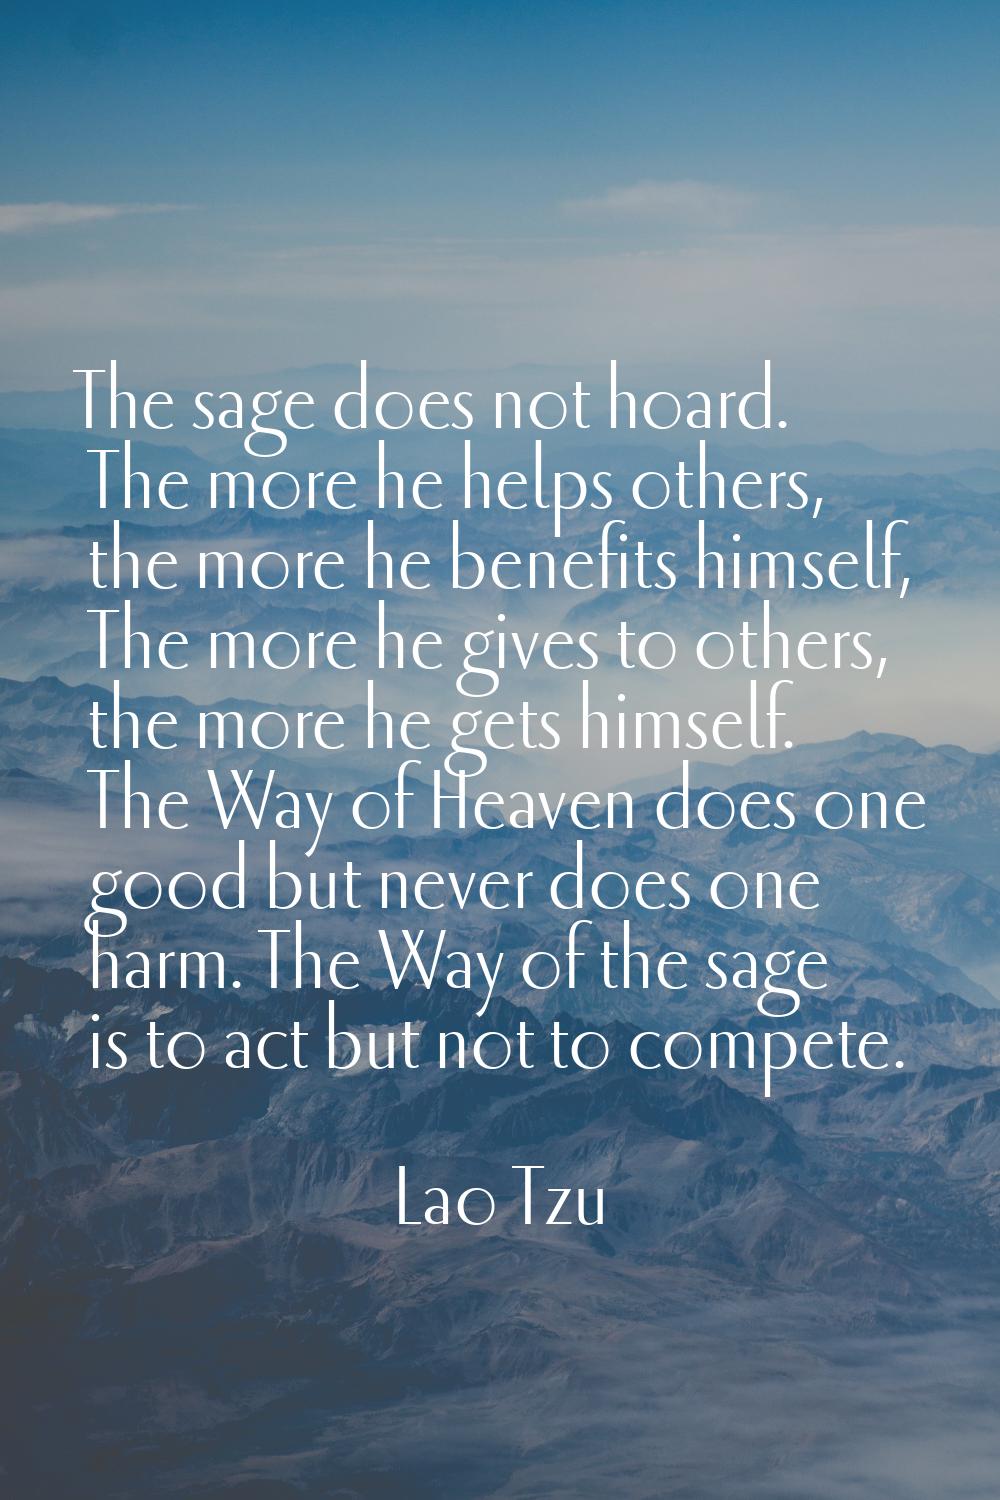 The sage does not hoard. The more he helps others, the more he benefits himself, The more he gives 